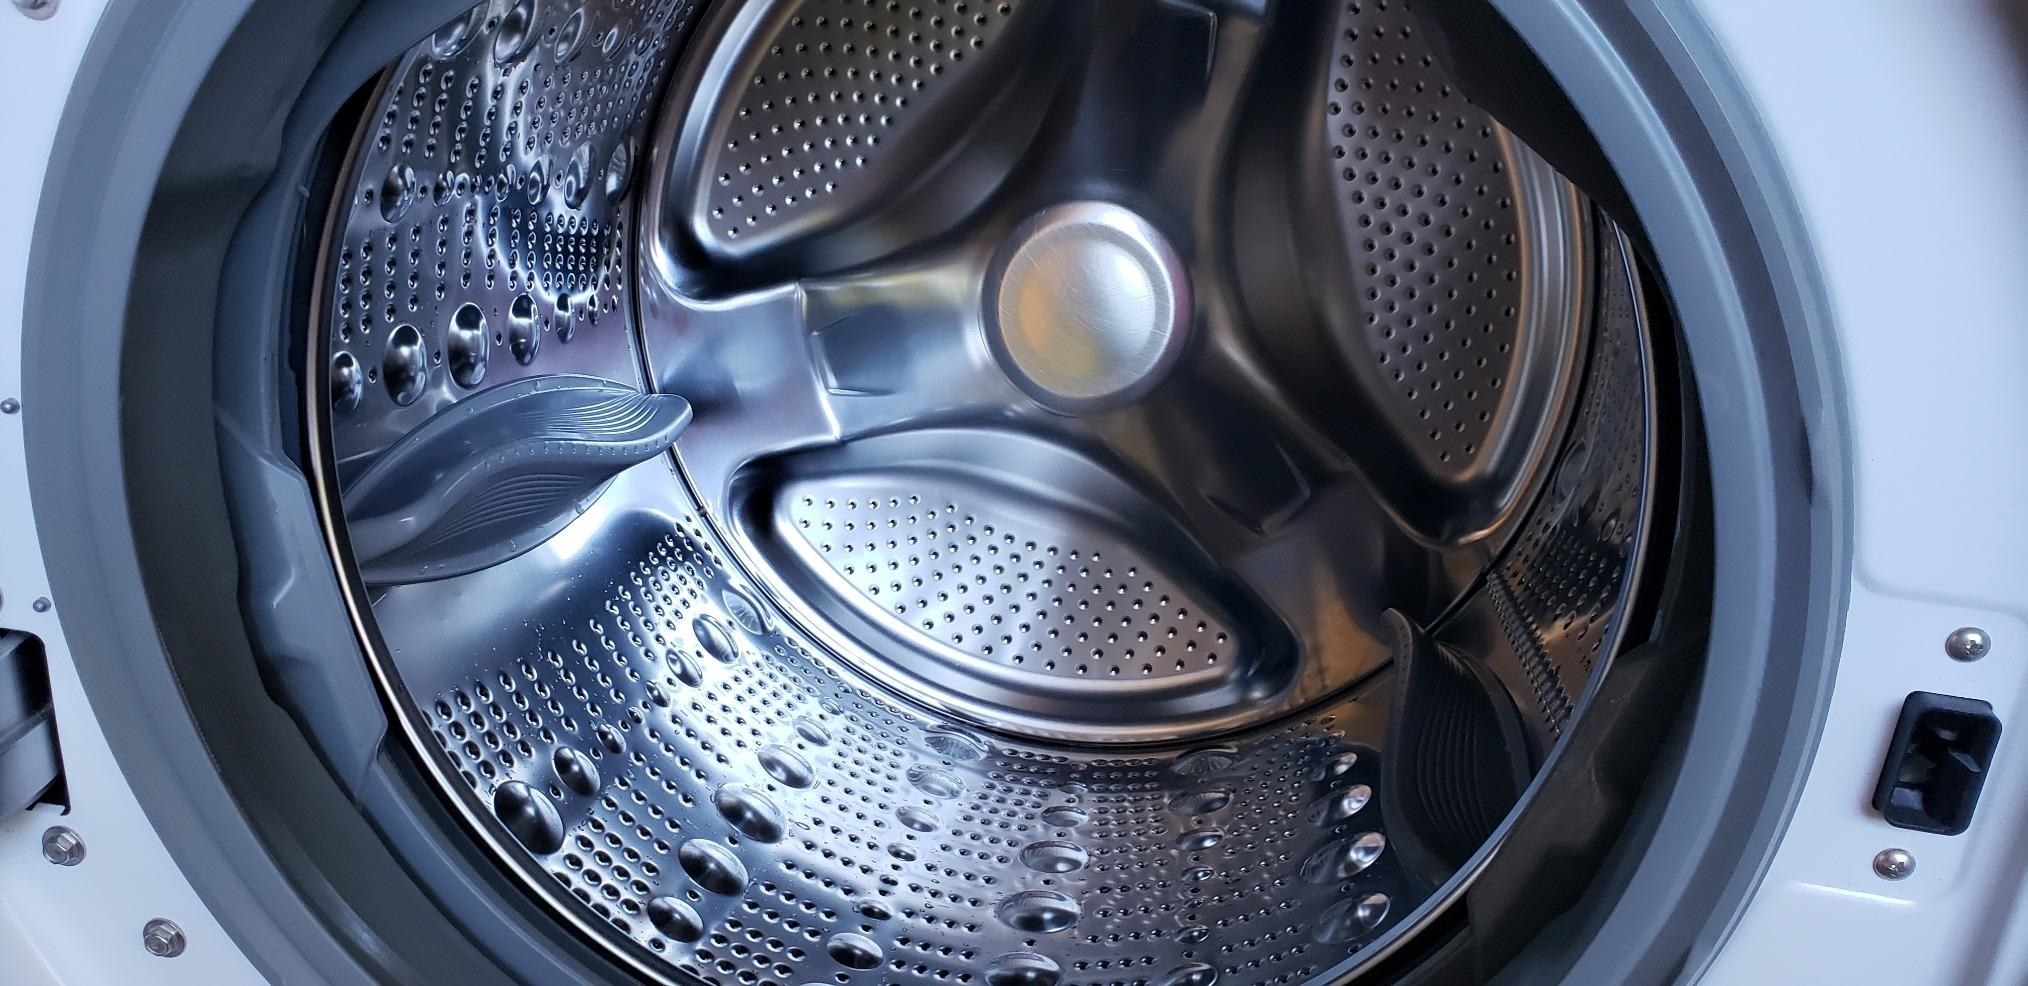 the sparklingly clean inside of a washing machine